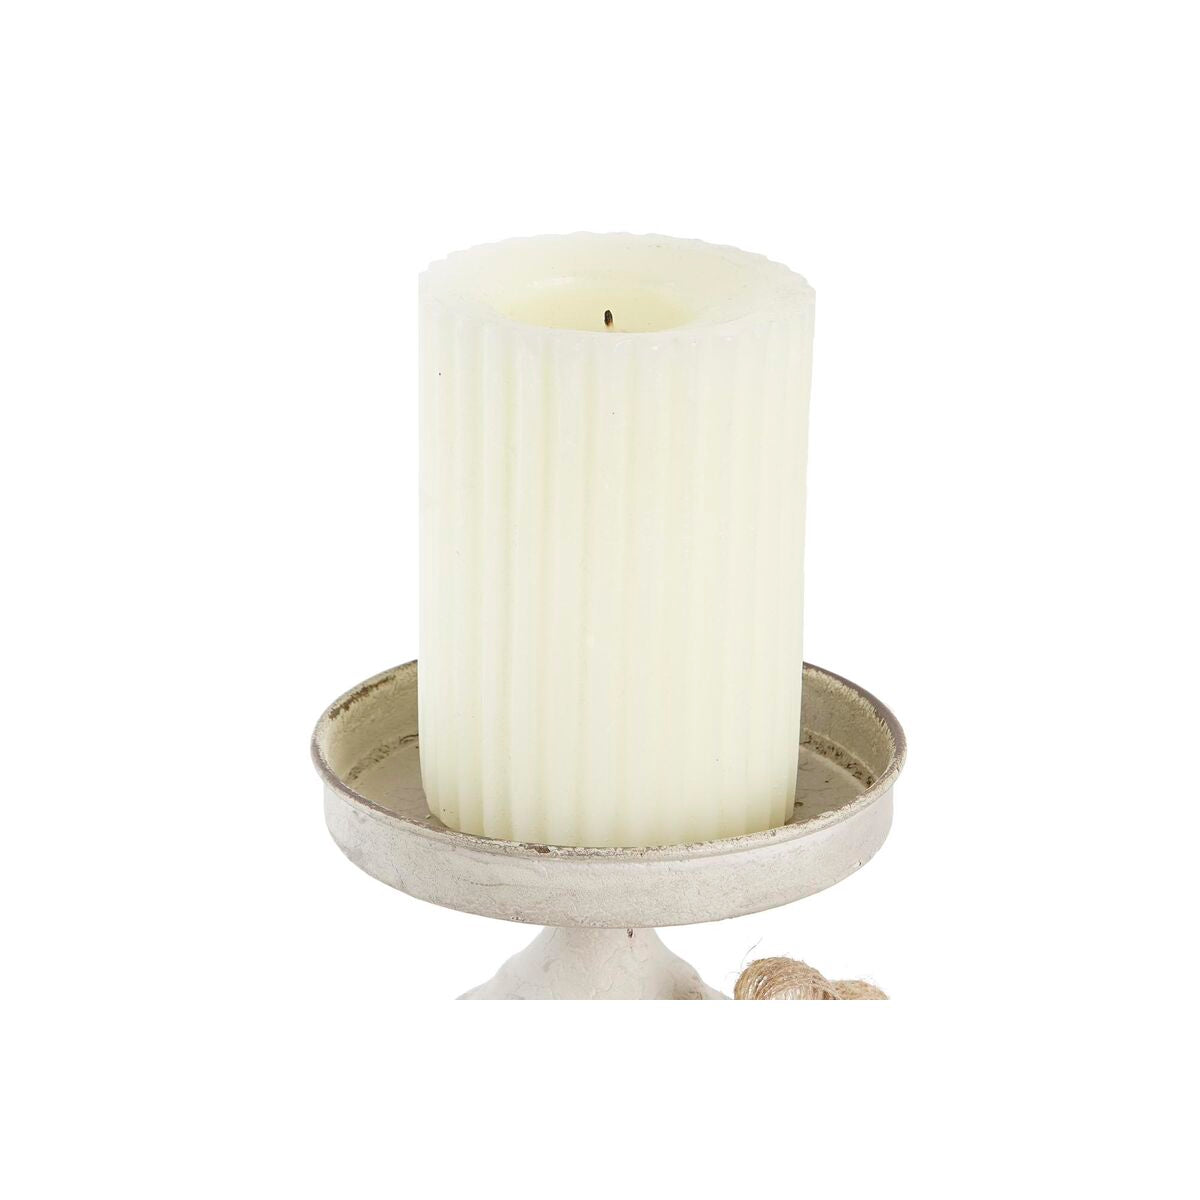 DKD Home Decor Metal Candle Holder (13 x 13 x 17.5 cm)